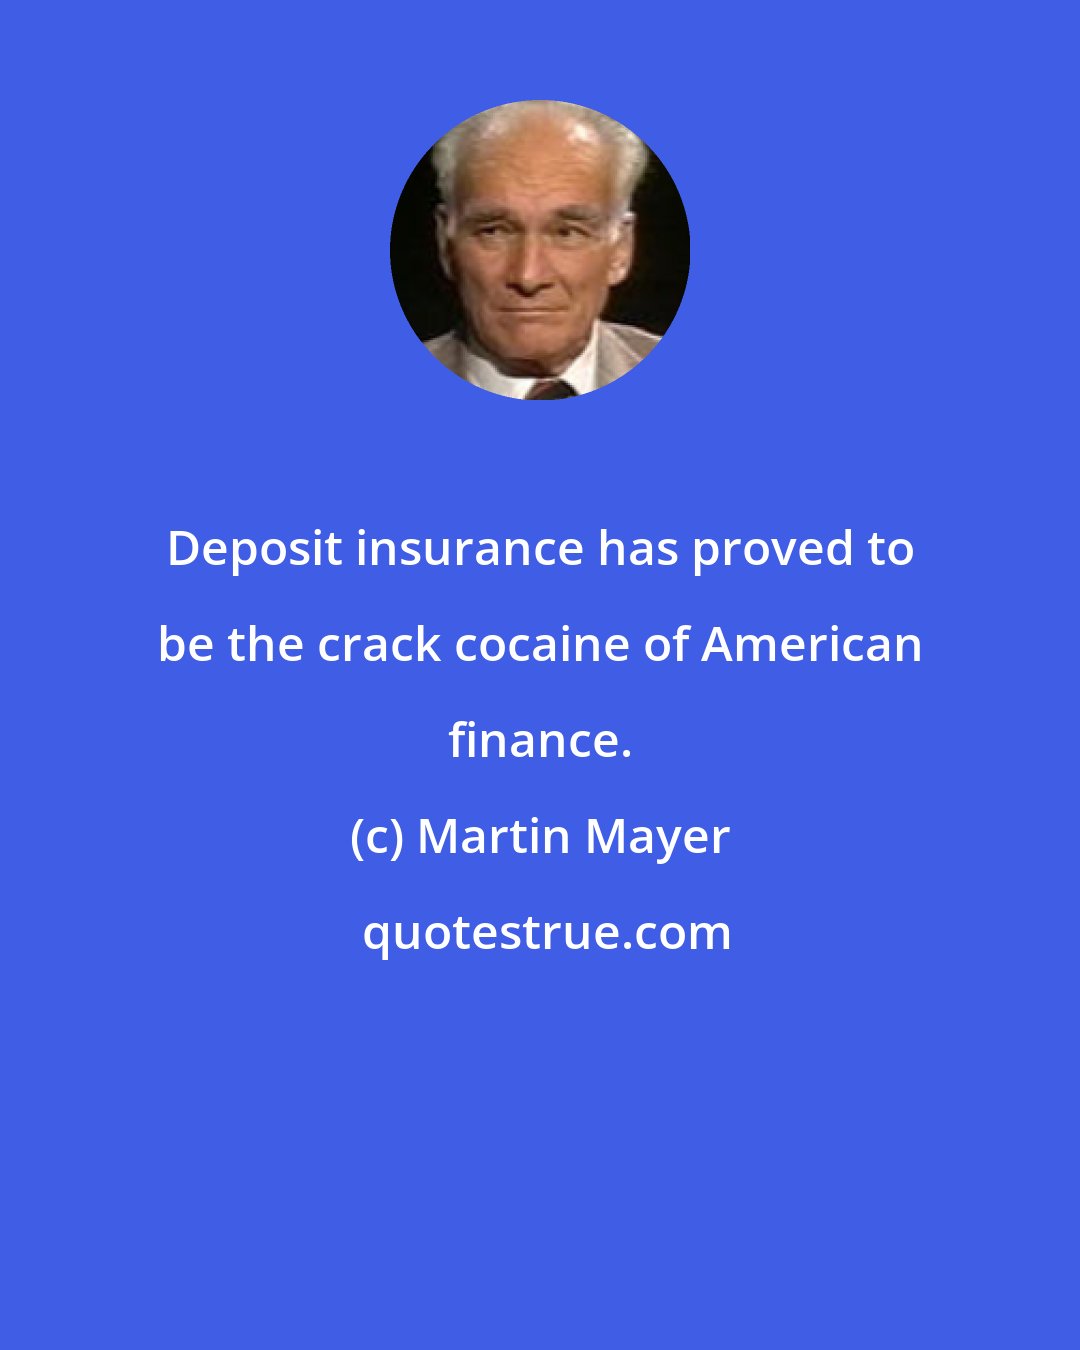 Martin Mayer: Deposit insurance has proved to be the crack cocaine of American finance.